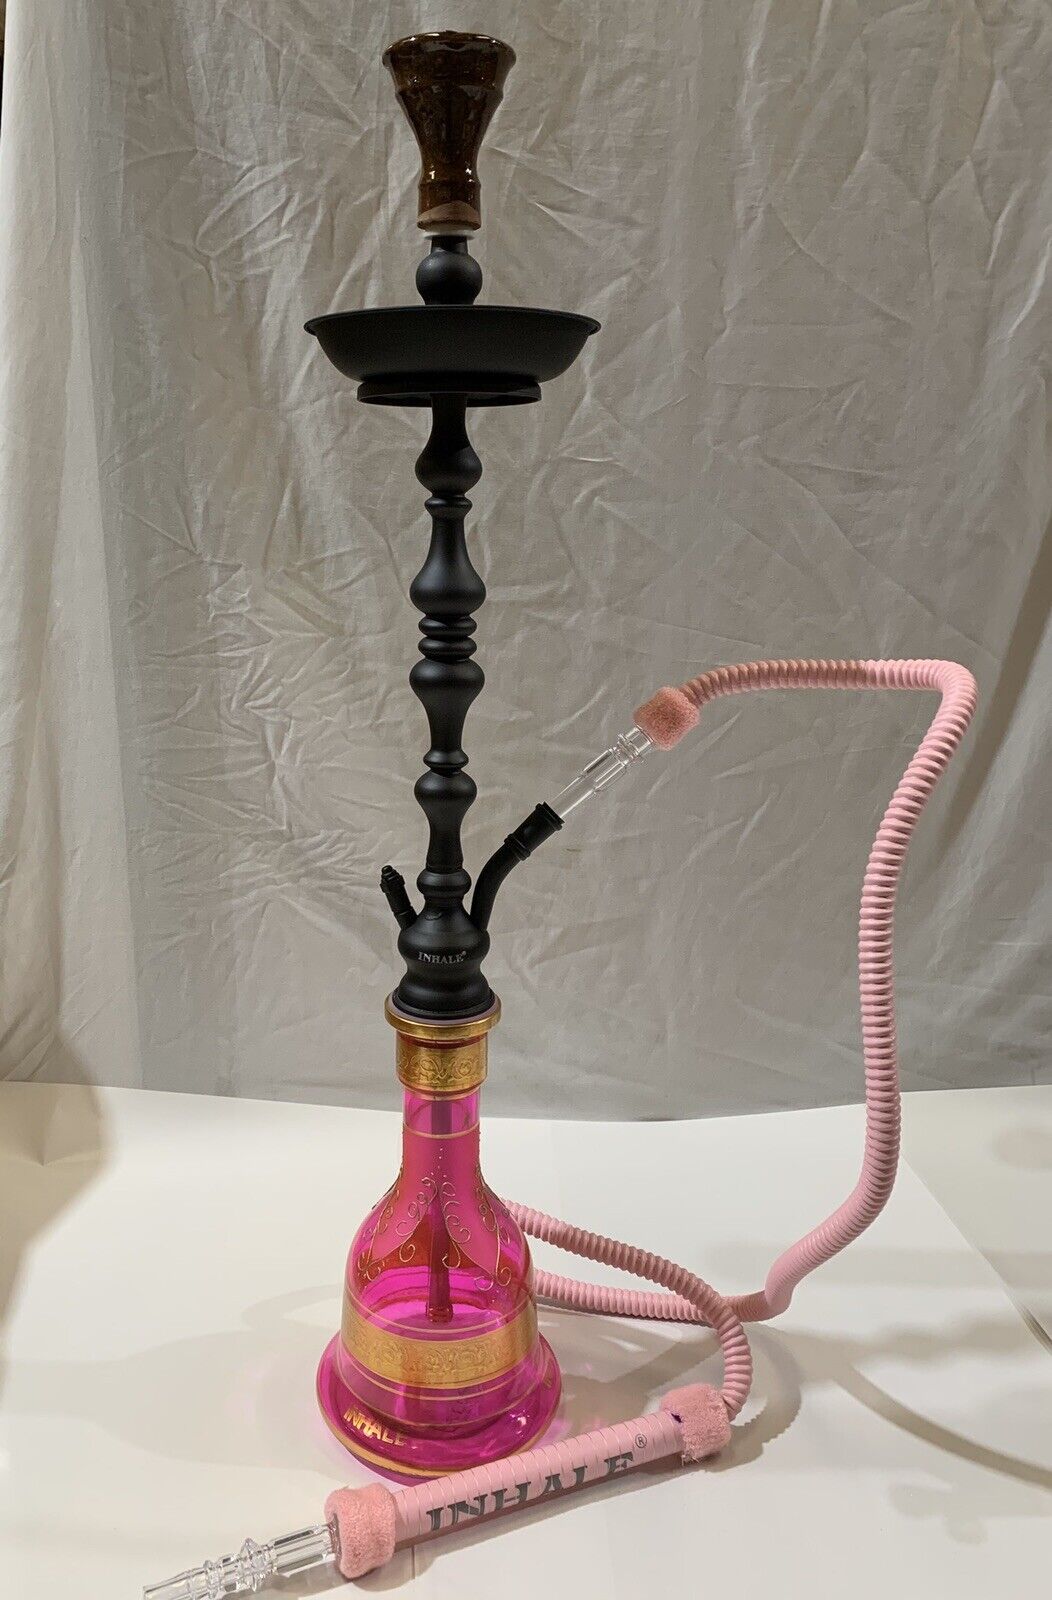 INHALE 32 “ TURBO  EGYPTIAN STYLE HOOKAH WITH AN EXTRA LARGE  DECORATIVE HOSE